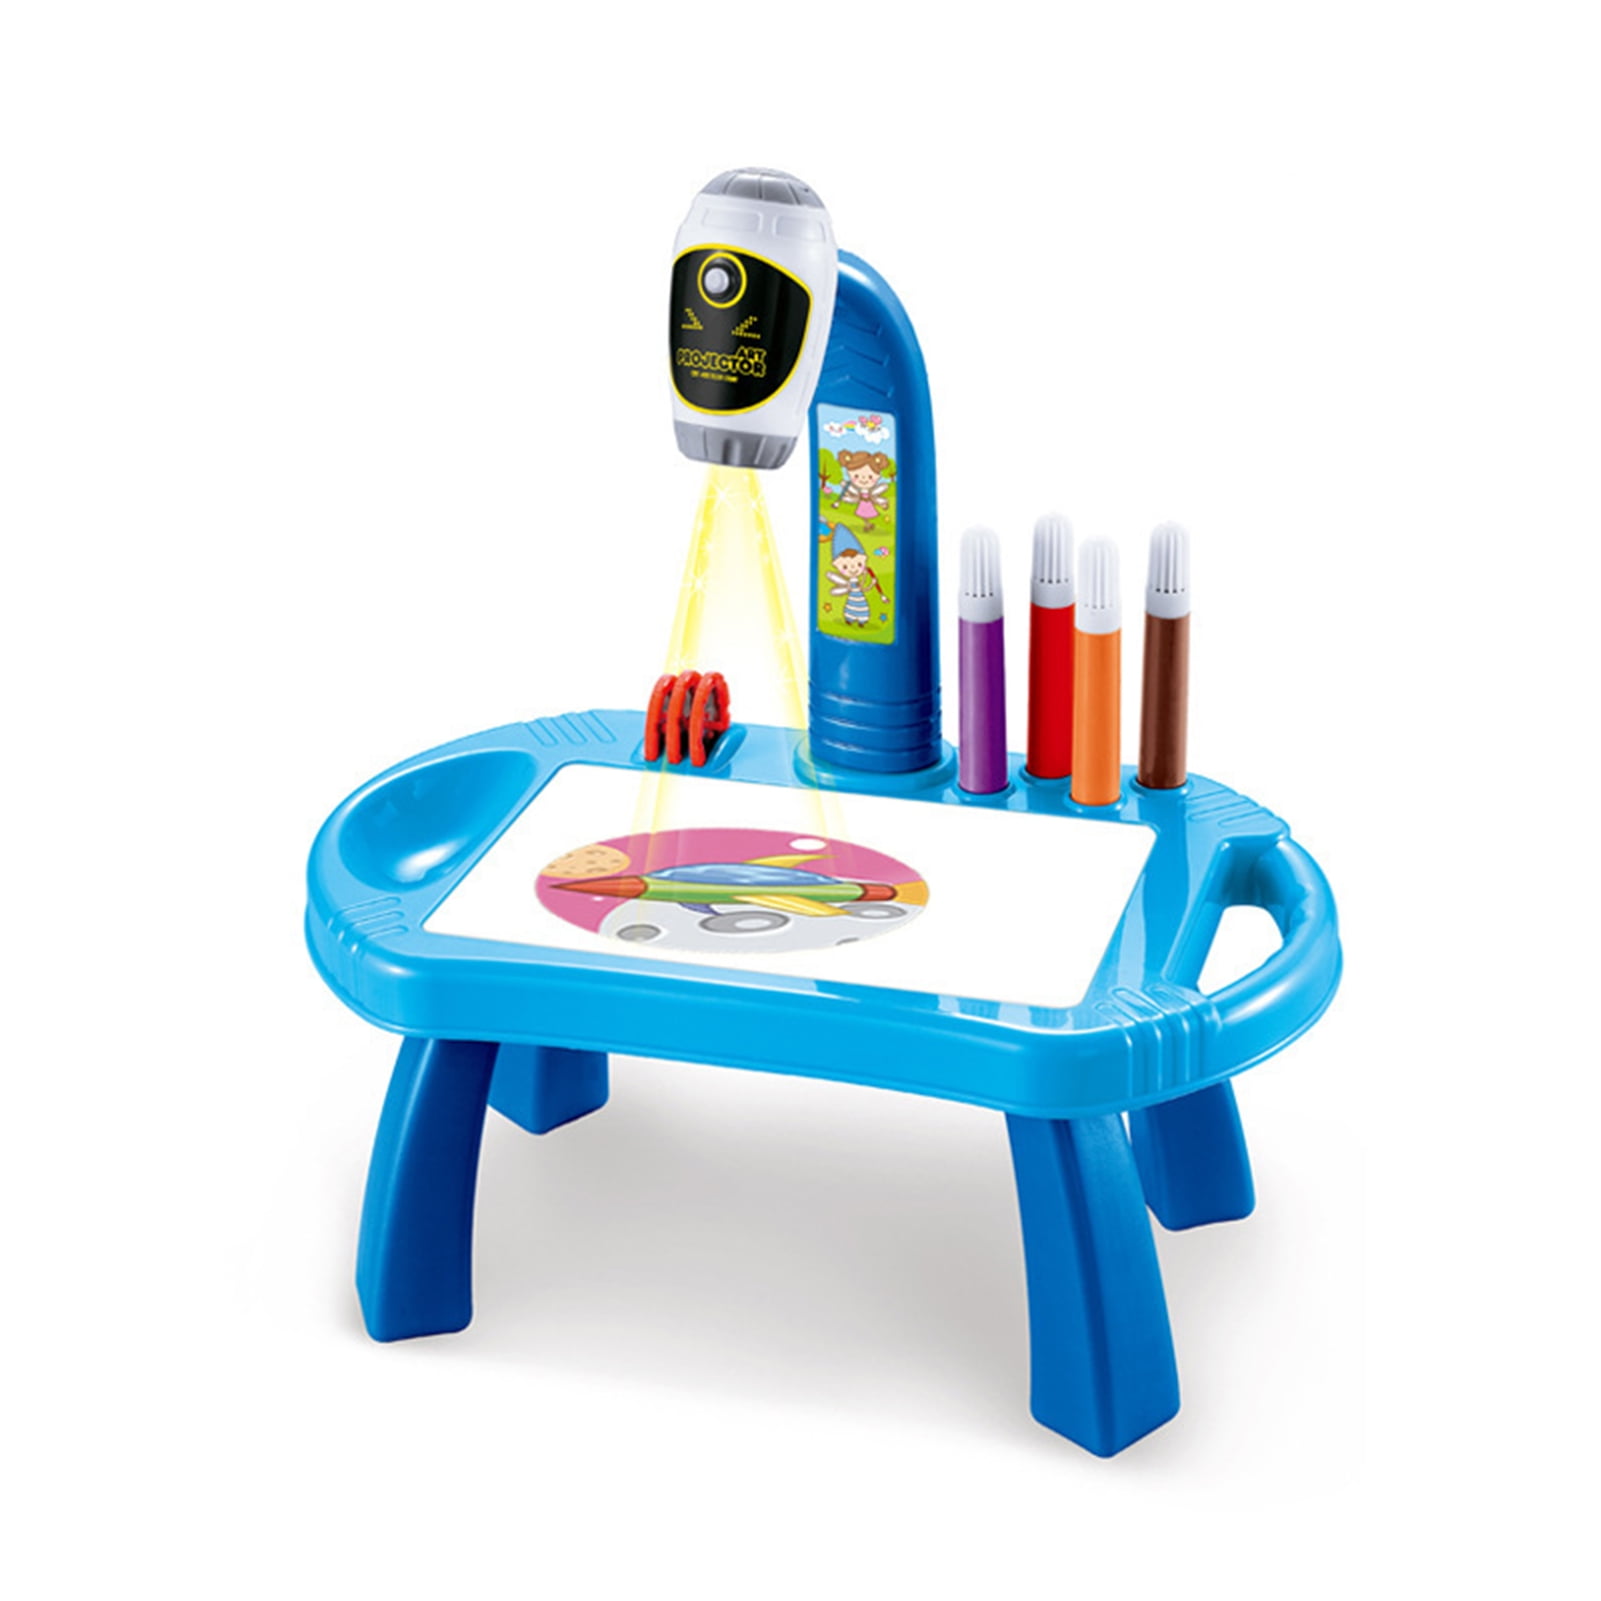 ESHOO Drawing Board for Kids, Learning Desk with Projector, Drawing Projector Table, Toddler Drawing Board, Projector Learning and Drawing Painting Set Art